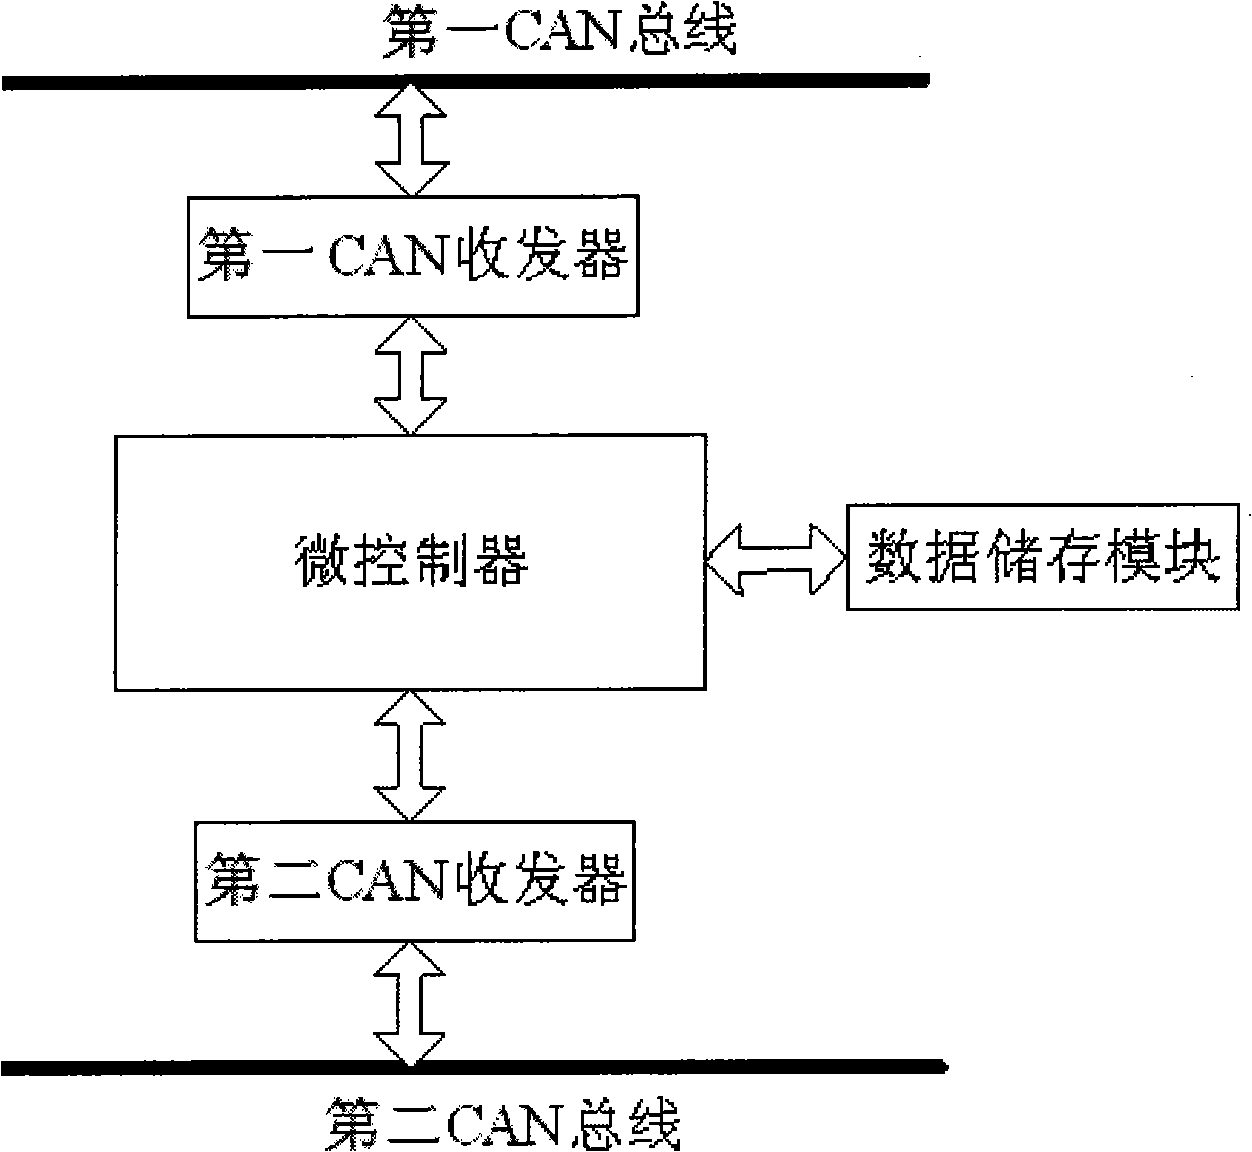 CAN bus gateway controller and data transmission method between CAN buses